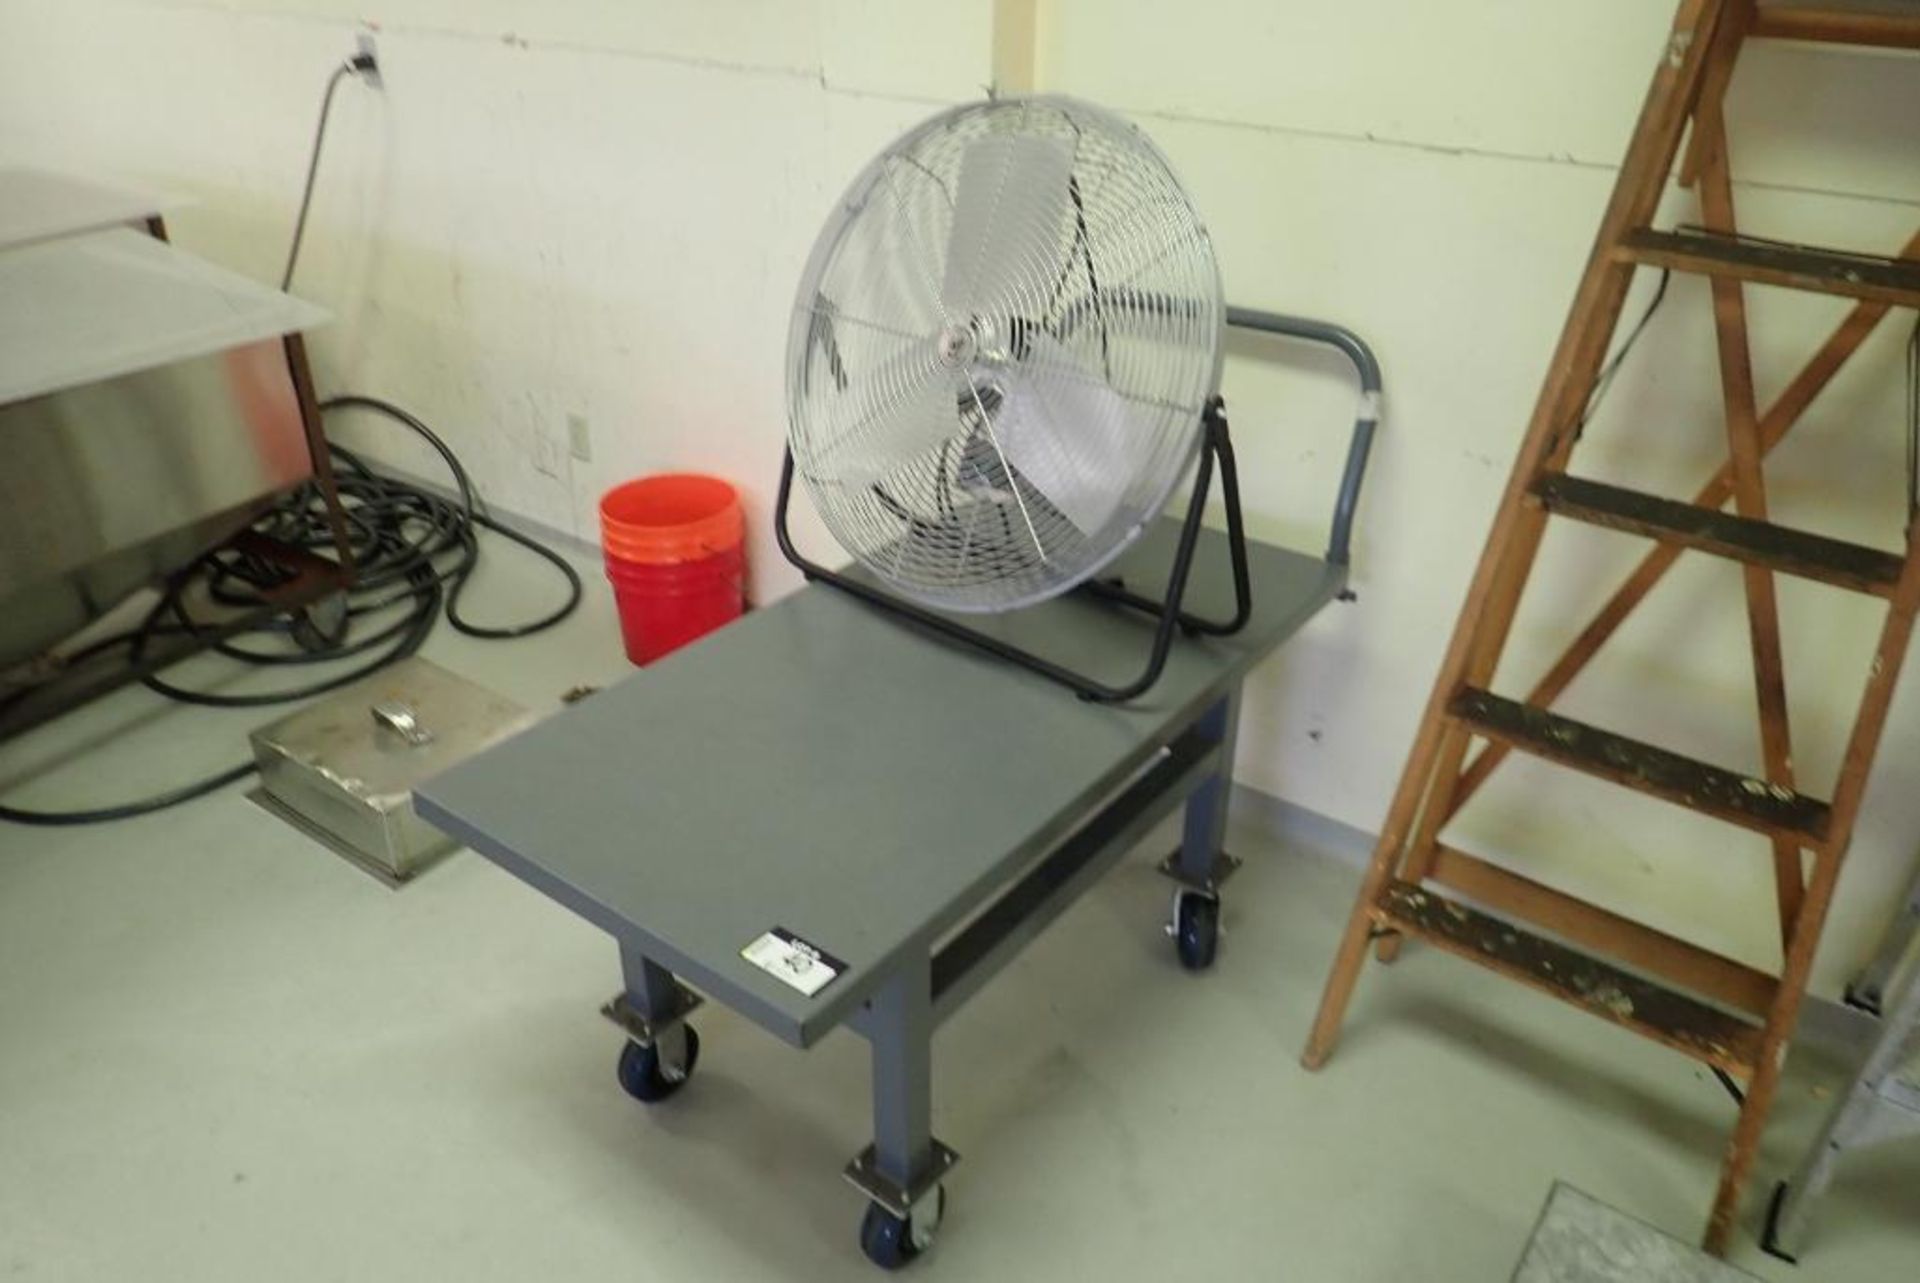 Lot of Mobile 2-Tier Cart, Fan, Wooden Step Ladder and Aluminum Step Ladder. - Image 2 of 2